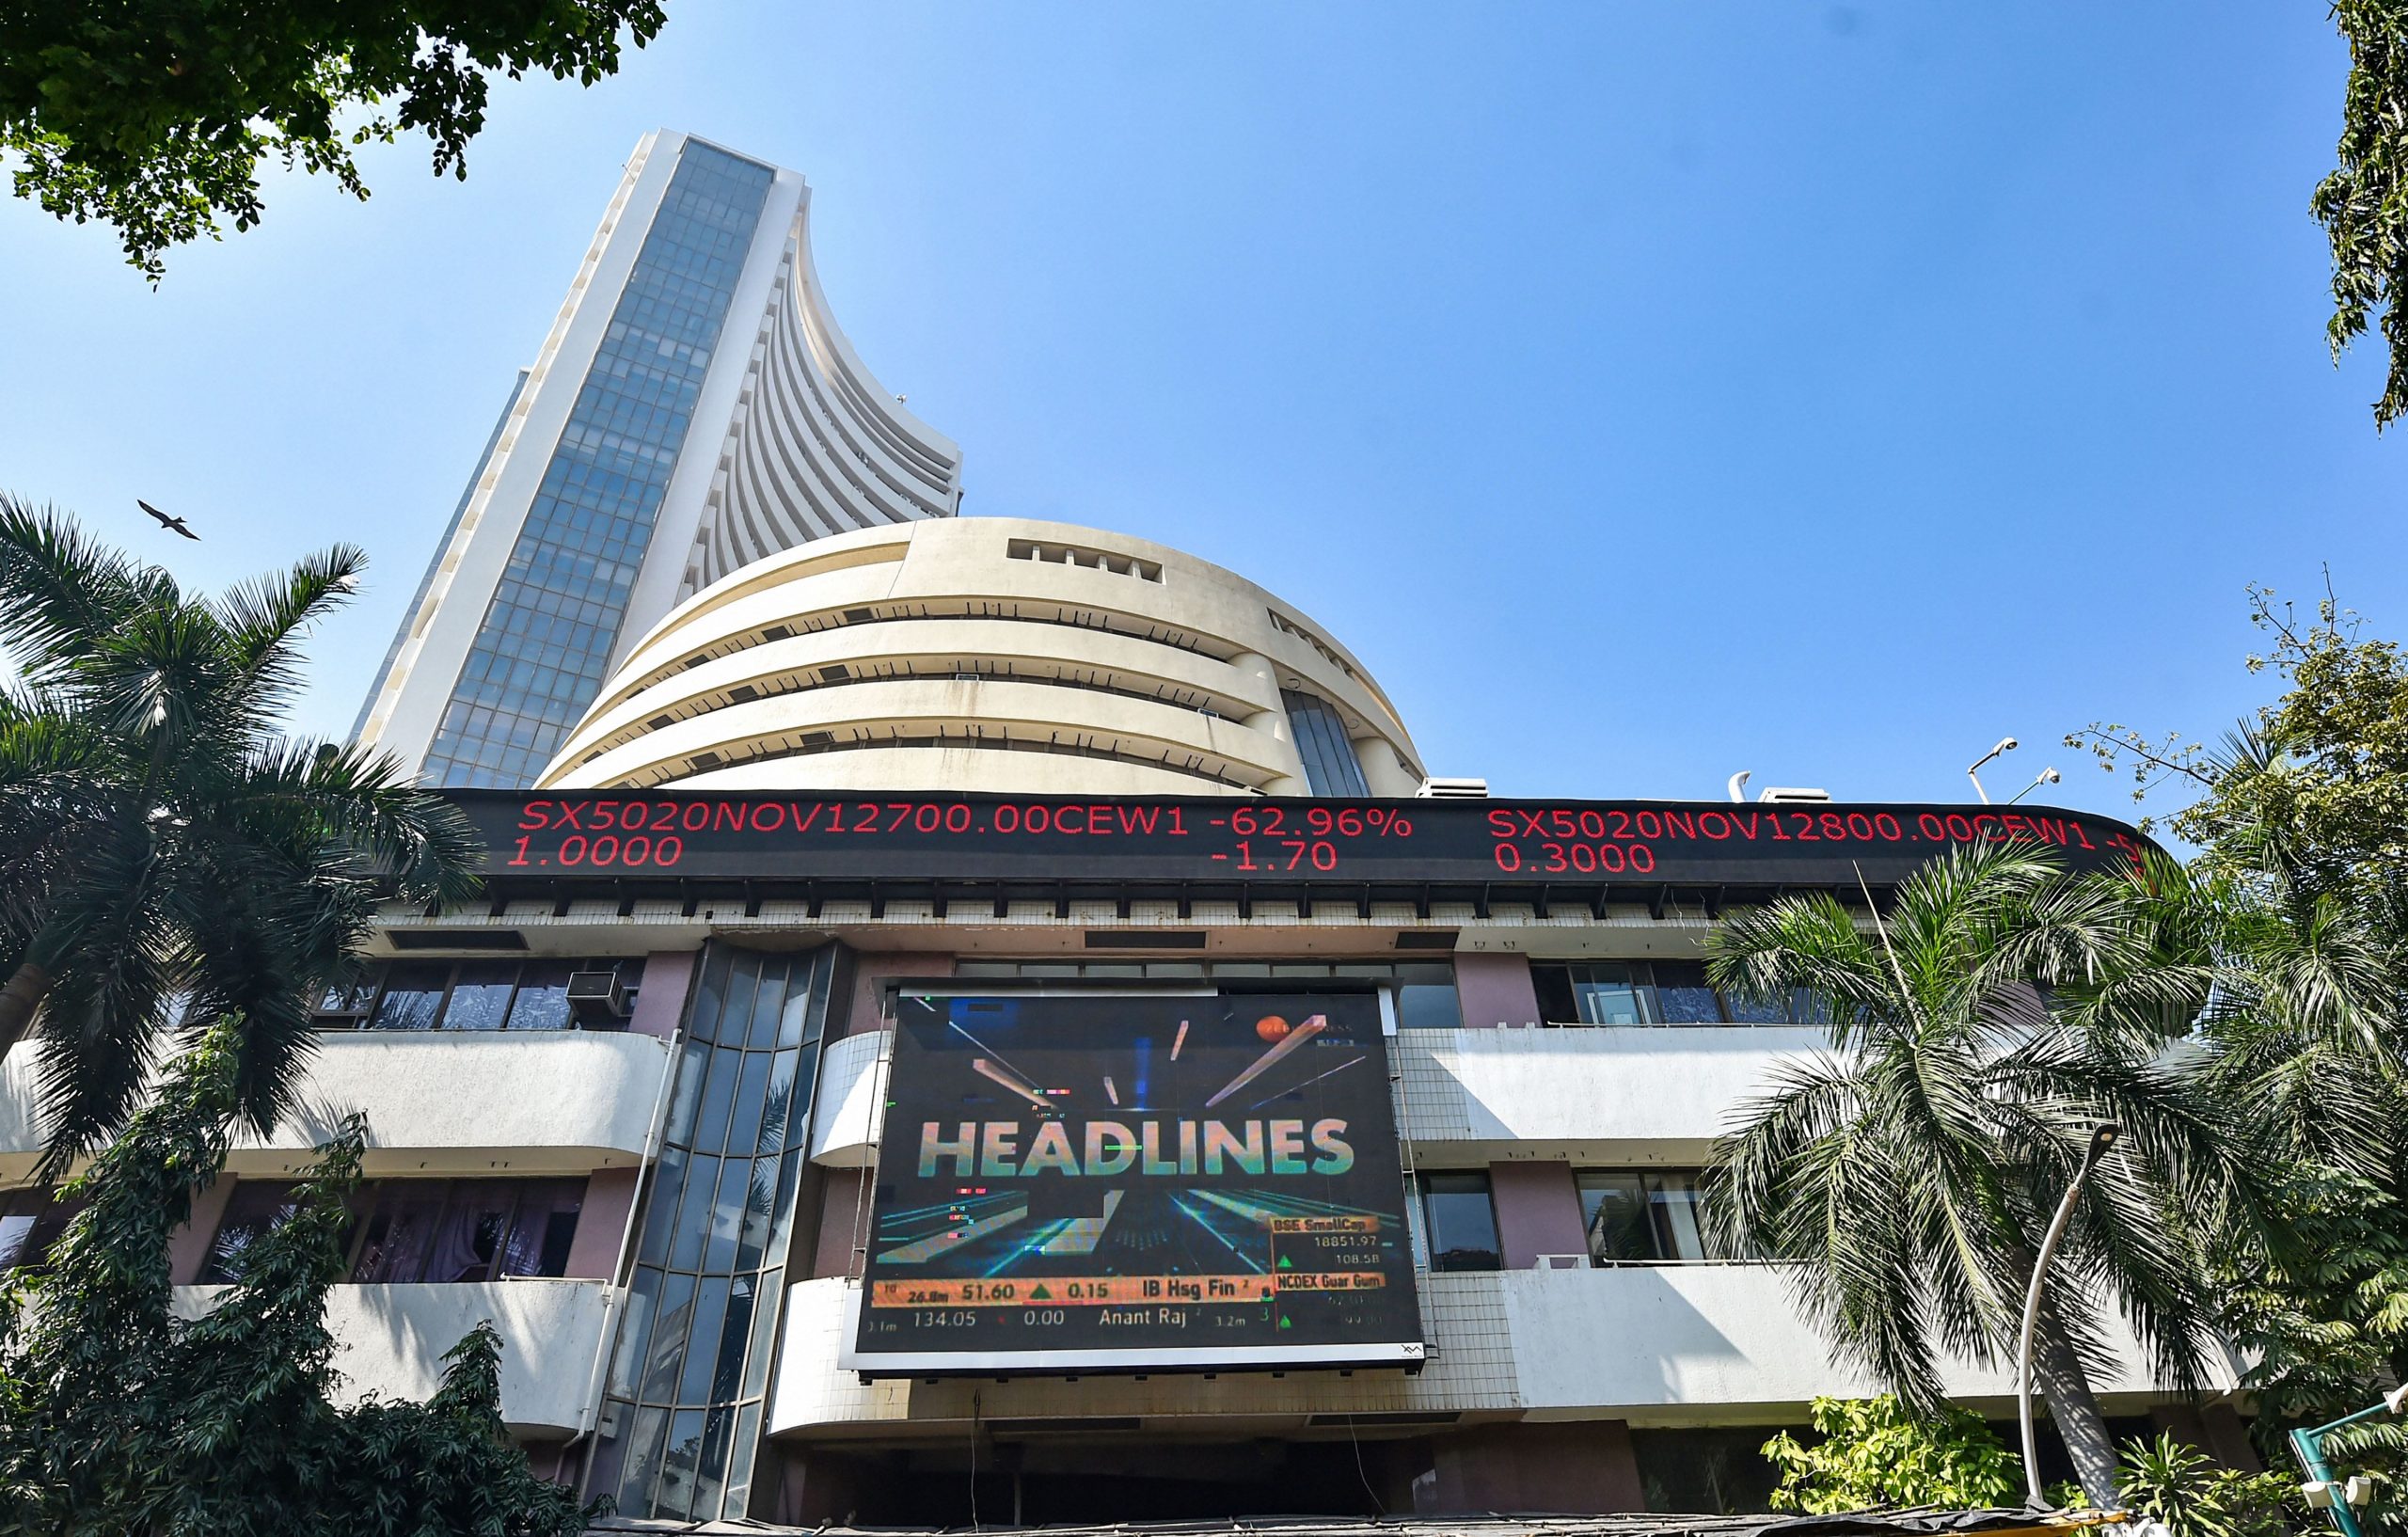 Trending Stocks: Axis bank, Tata Motors, SBI, RBL and others in news today